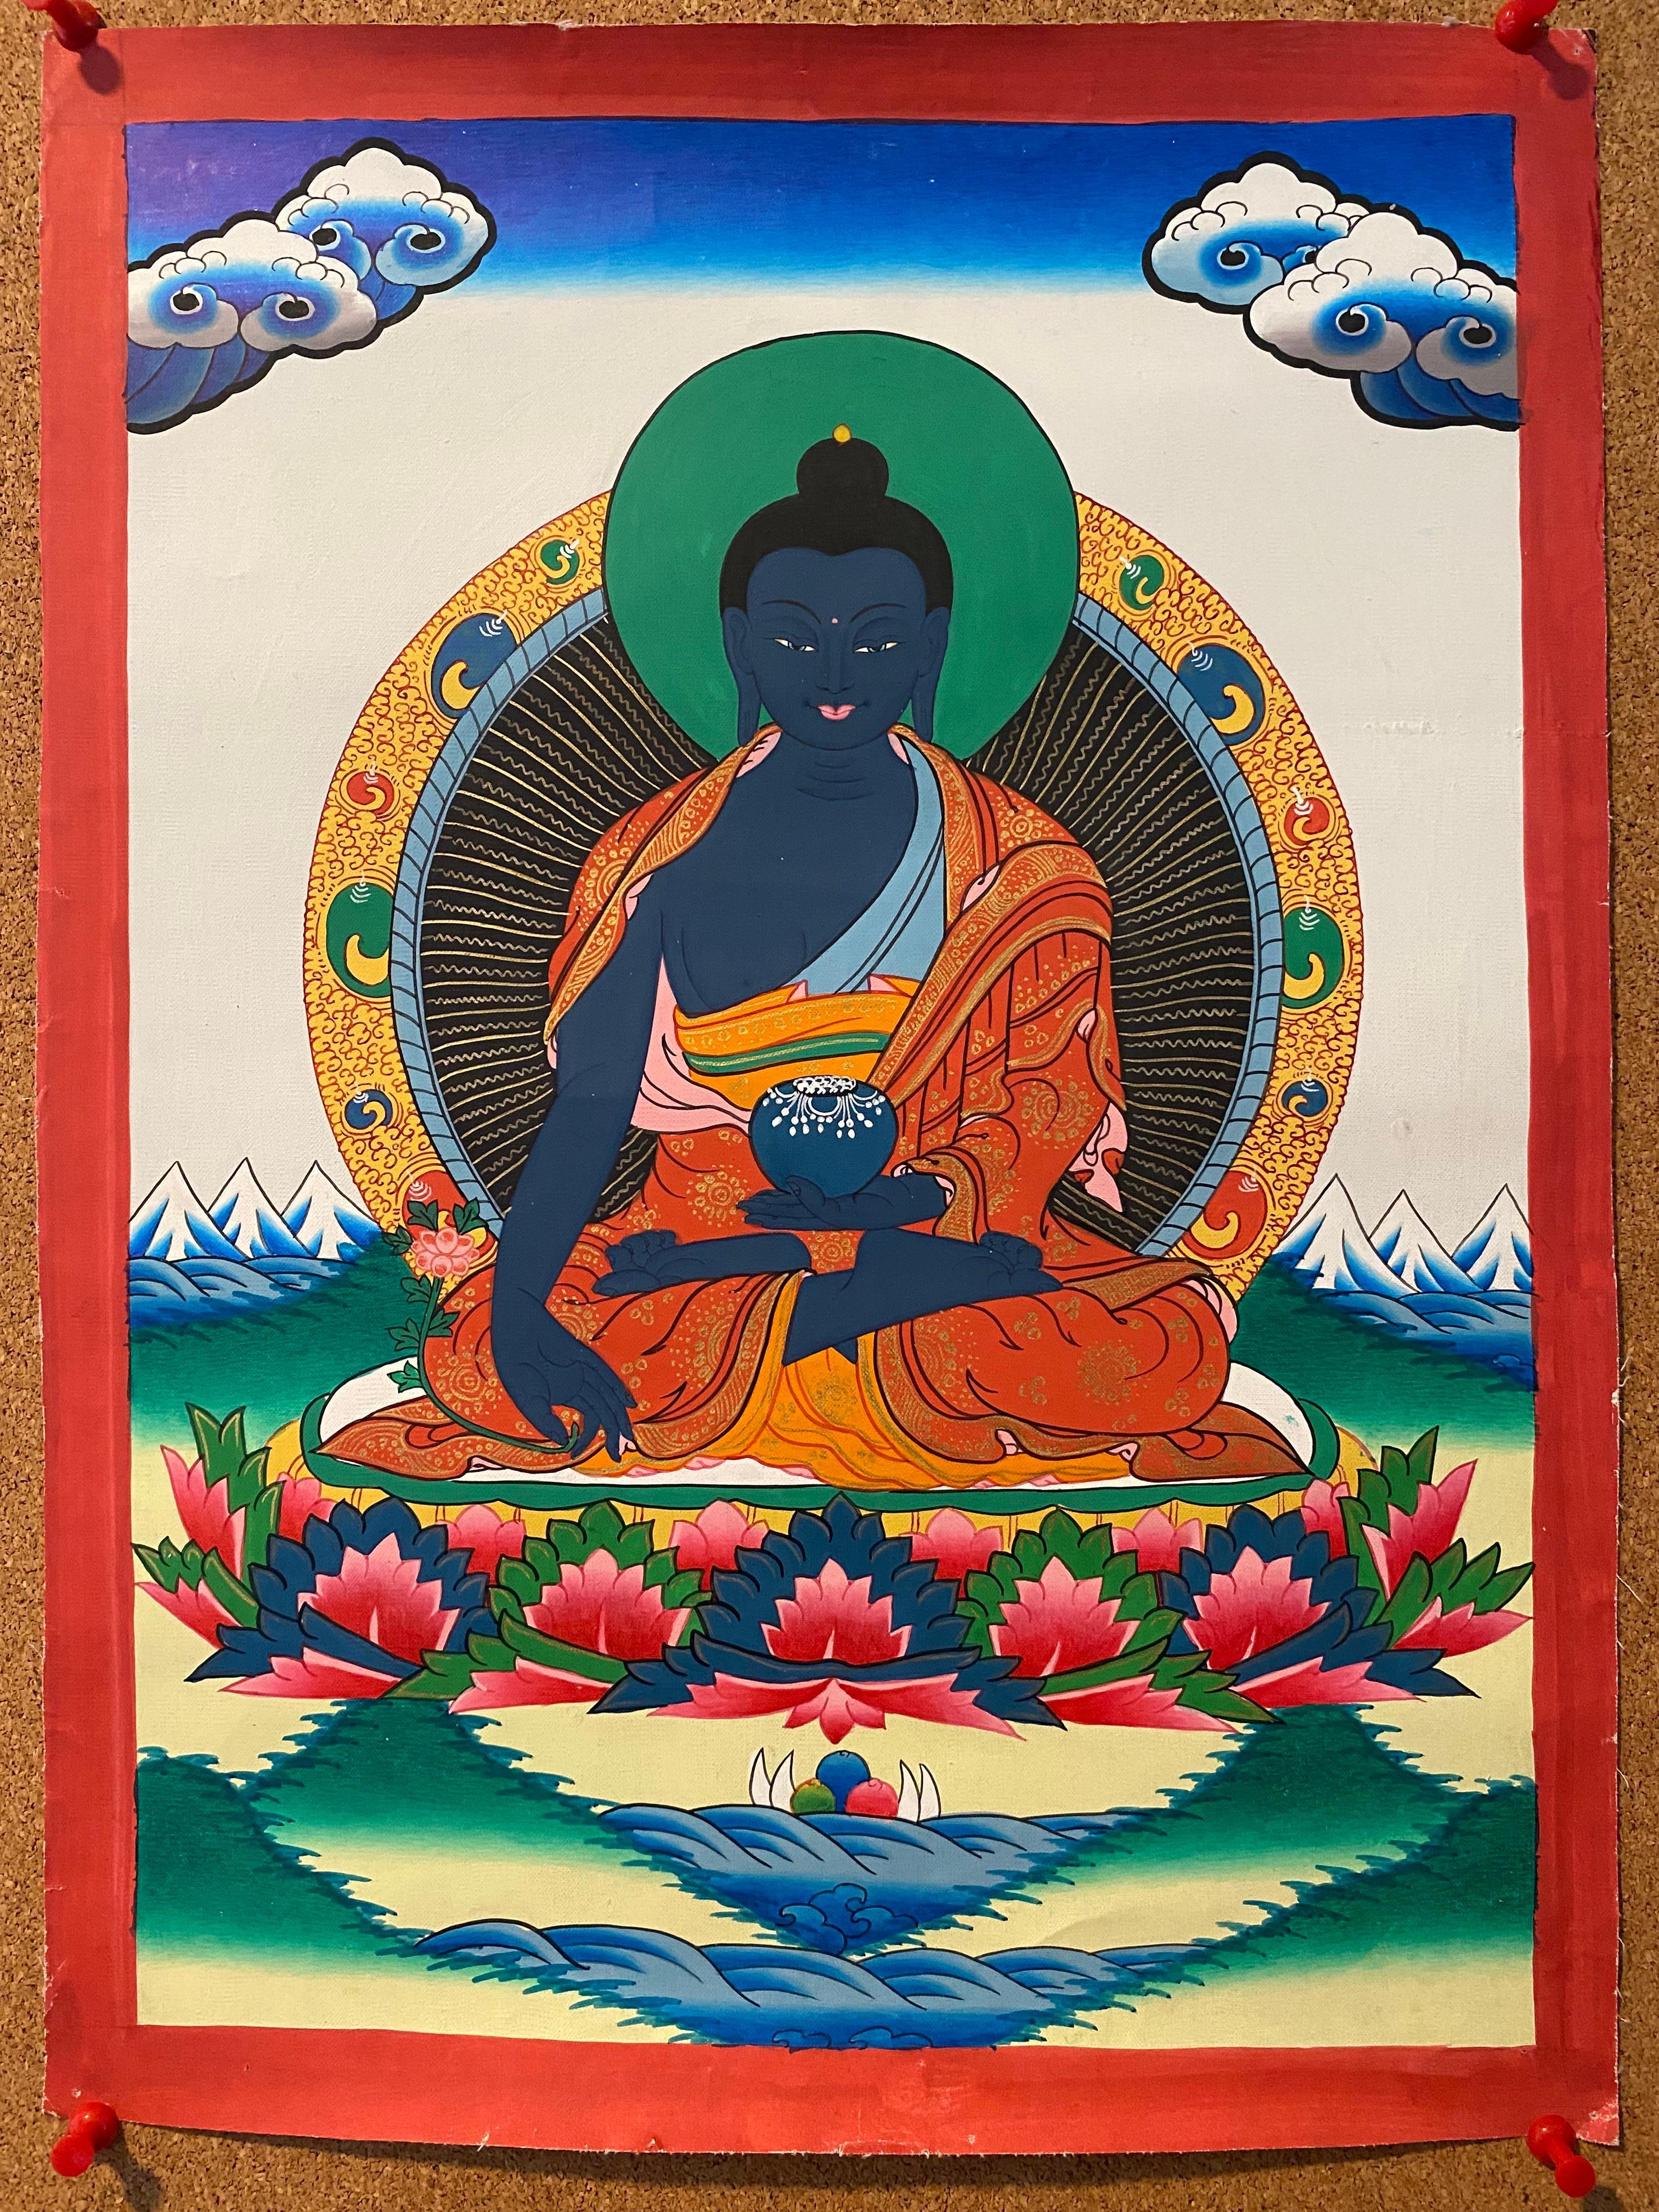 Unframed Hand Painted Medicine Buddha Thangka on Canvas 24K Gold - Painting by Unknown